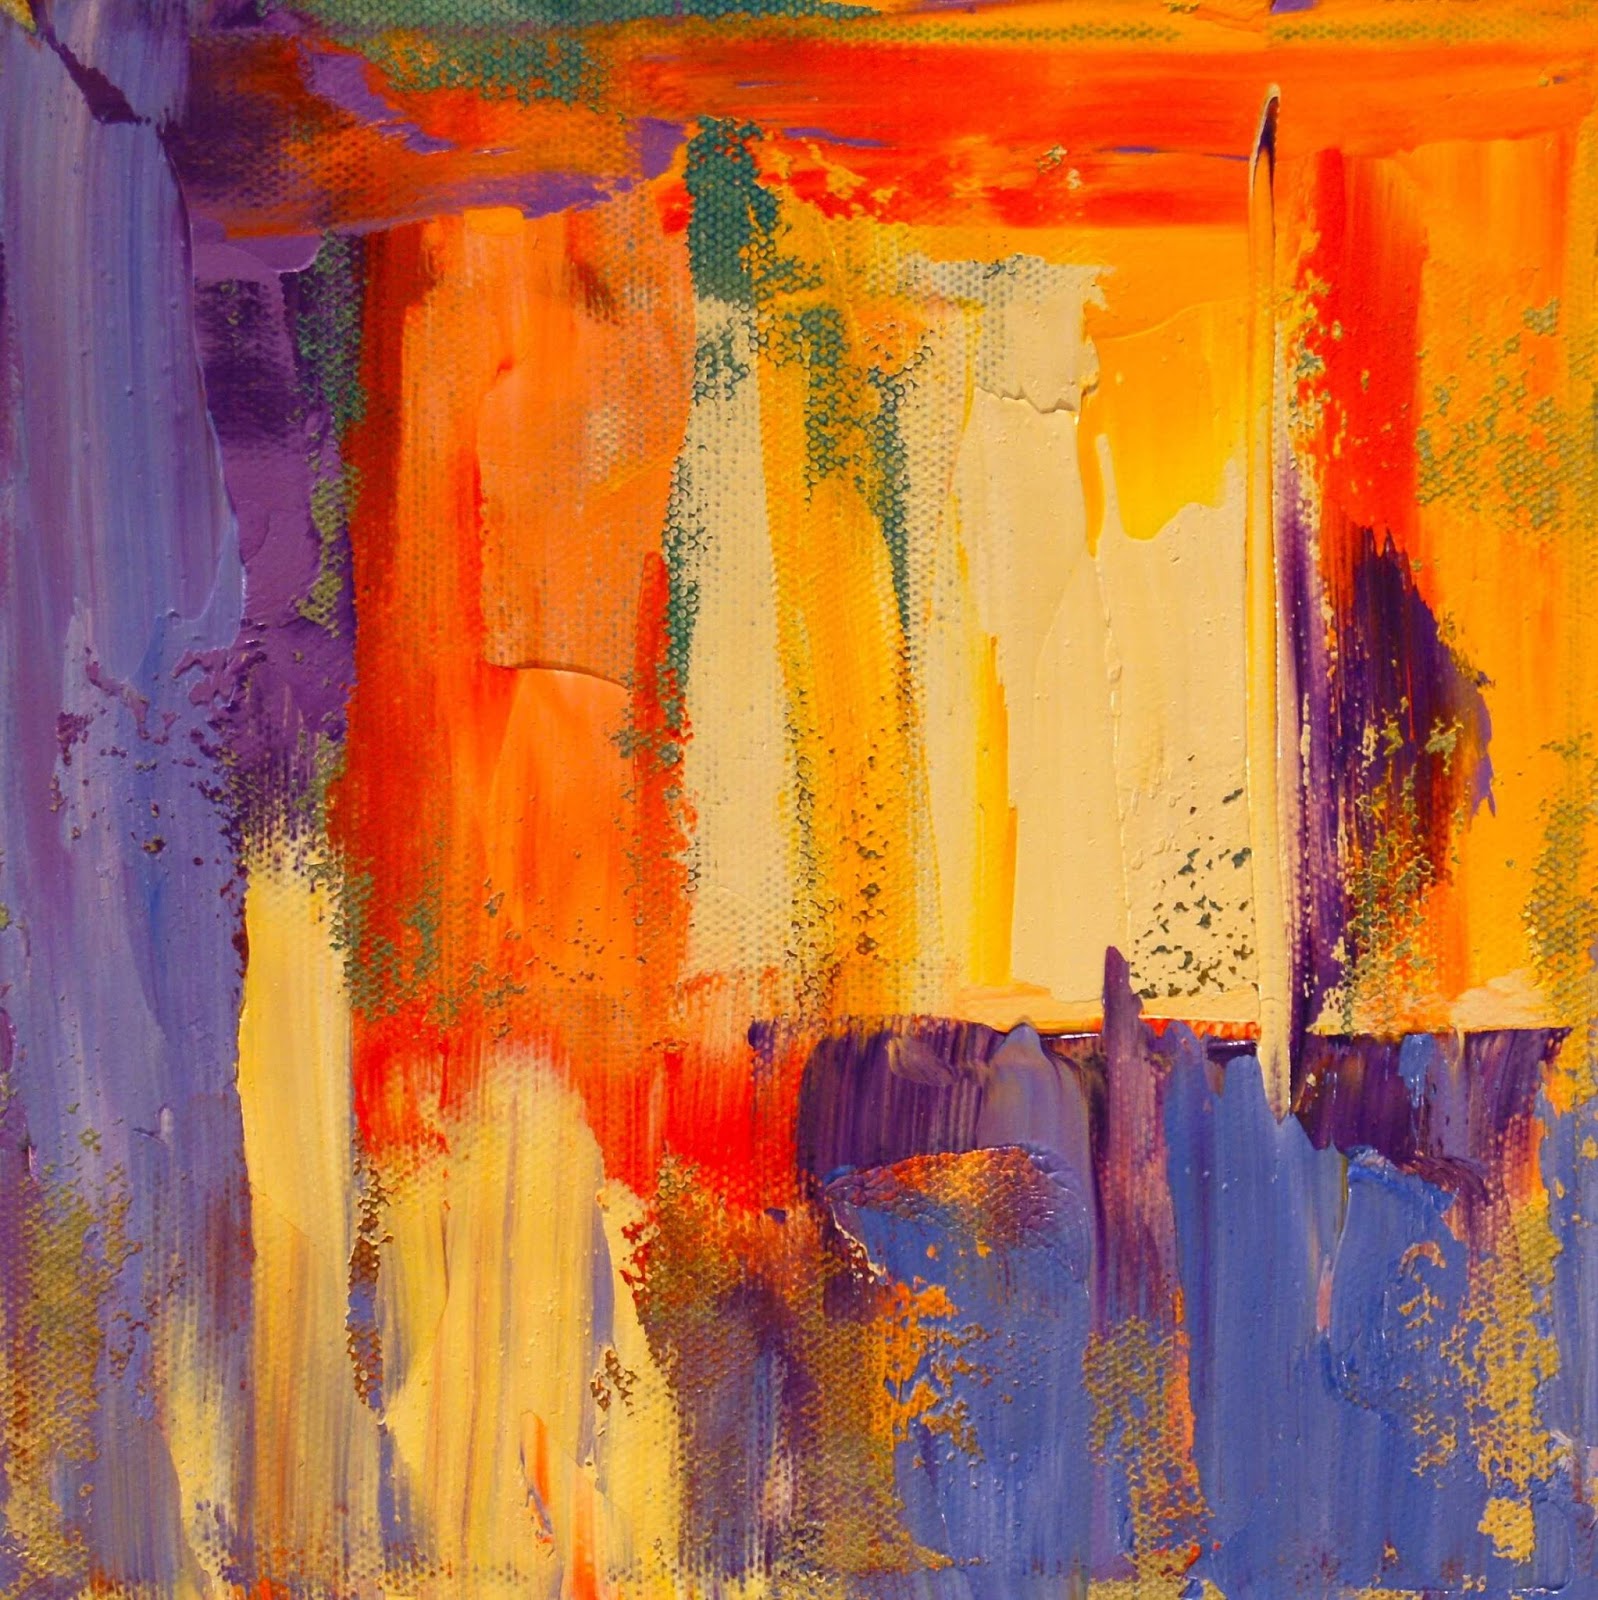 Paintings by Theresa Paden: Abstract Oil Painting in Bright Colors by